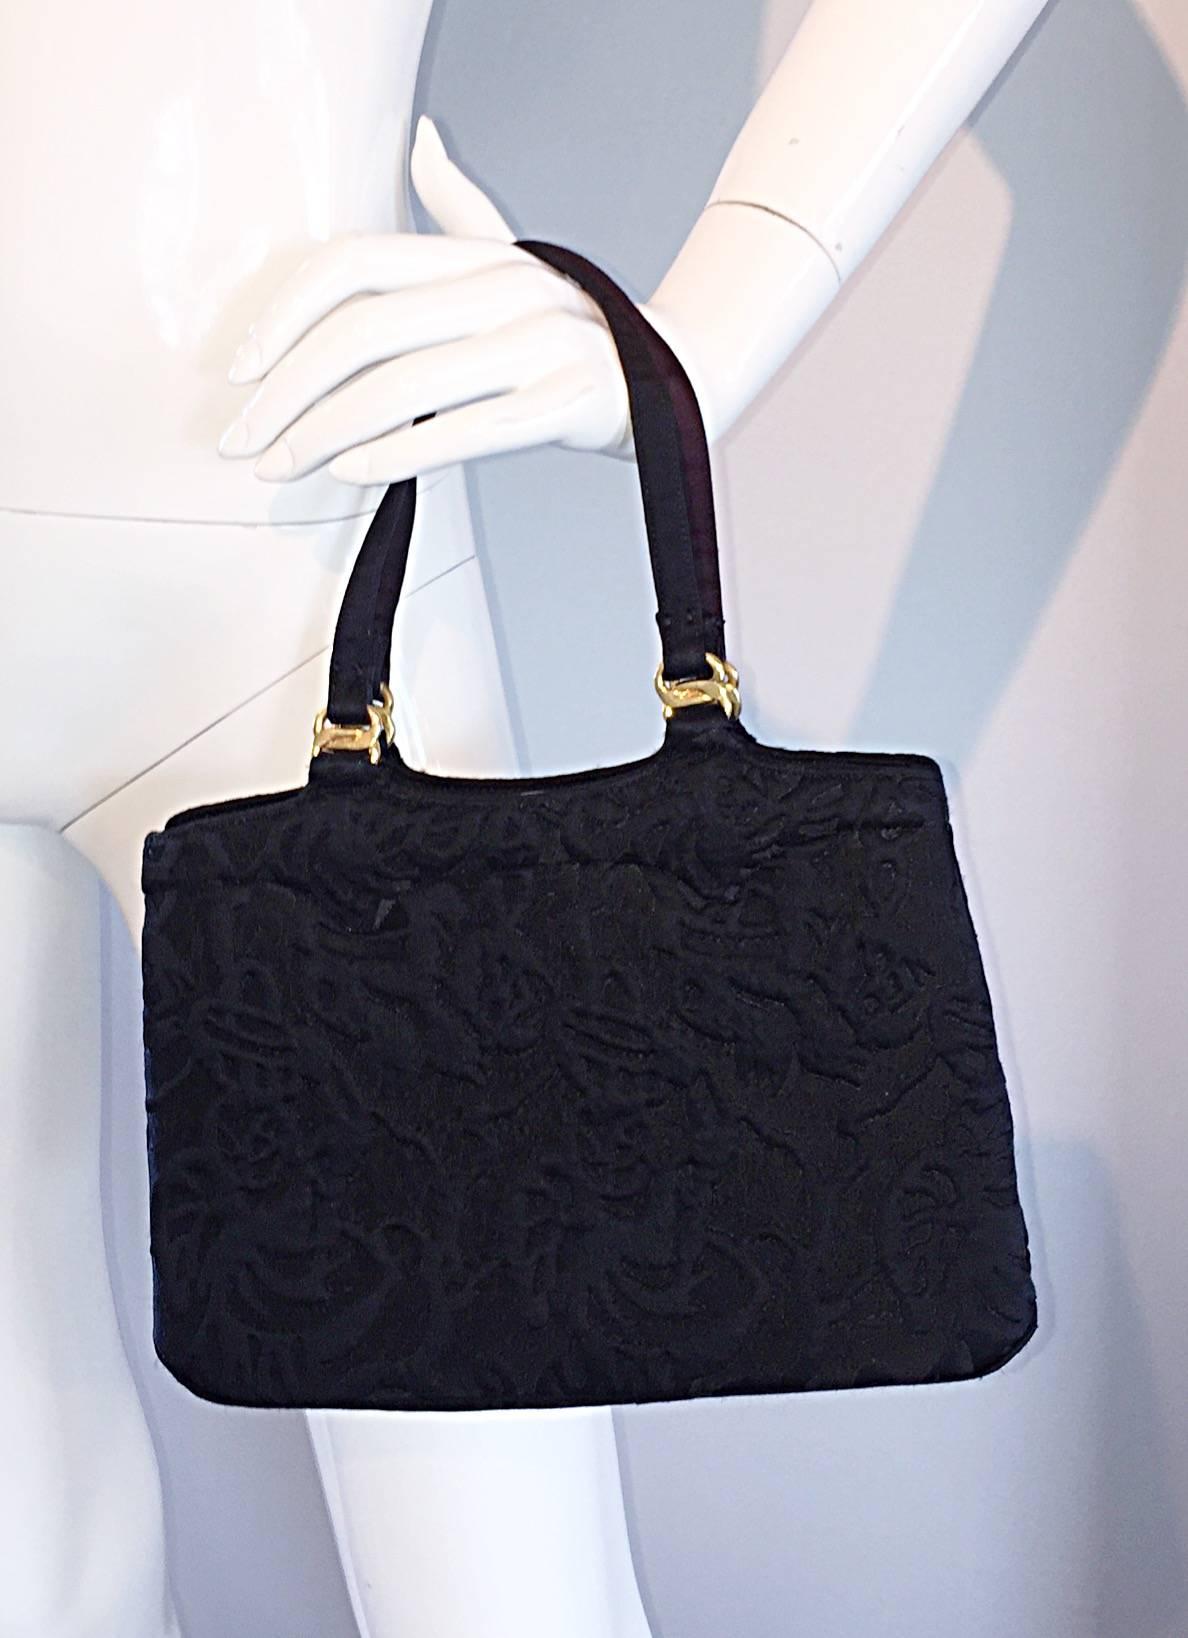 Beautiful brand new 50s KORET handbag/purse! Chic style, that has never been used. Hand-sewn black embroidery, on the finest black silk! So much detail was used to produce this beauty---they just don't make them like this anymore! Snaps shut in the